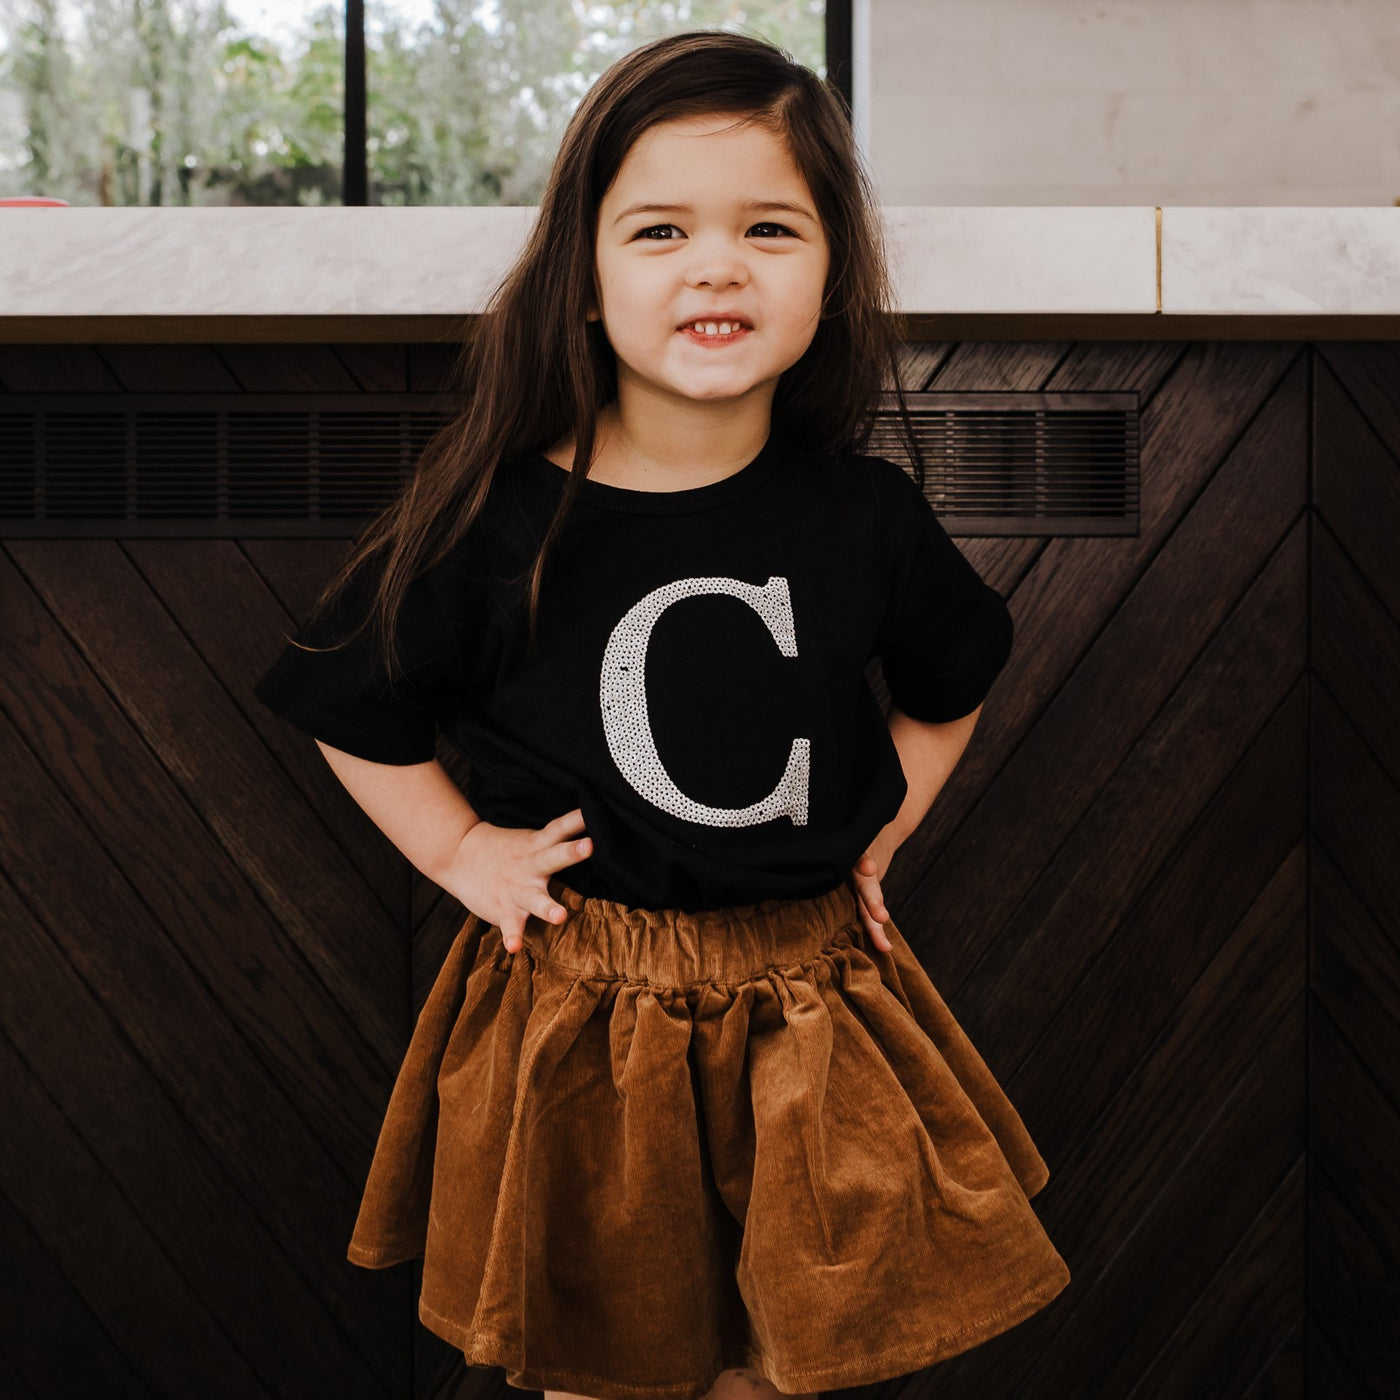 Girls Monogram T-Shirt - Black with Silver Sequin - Branche Store